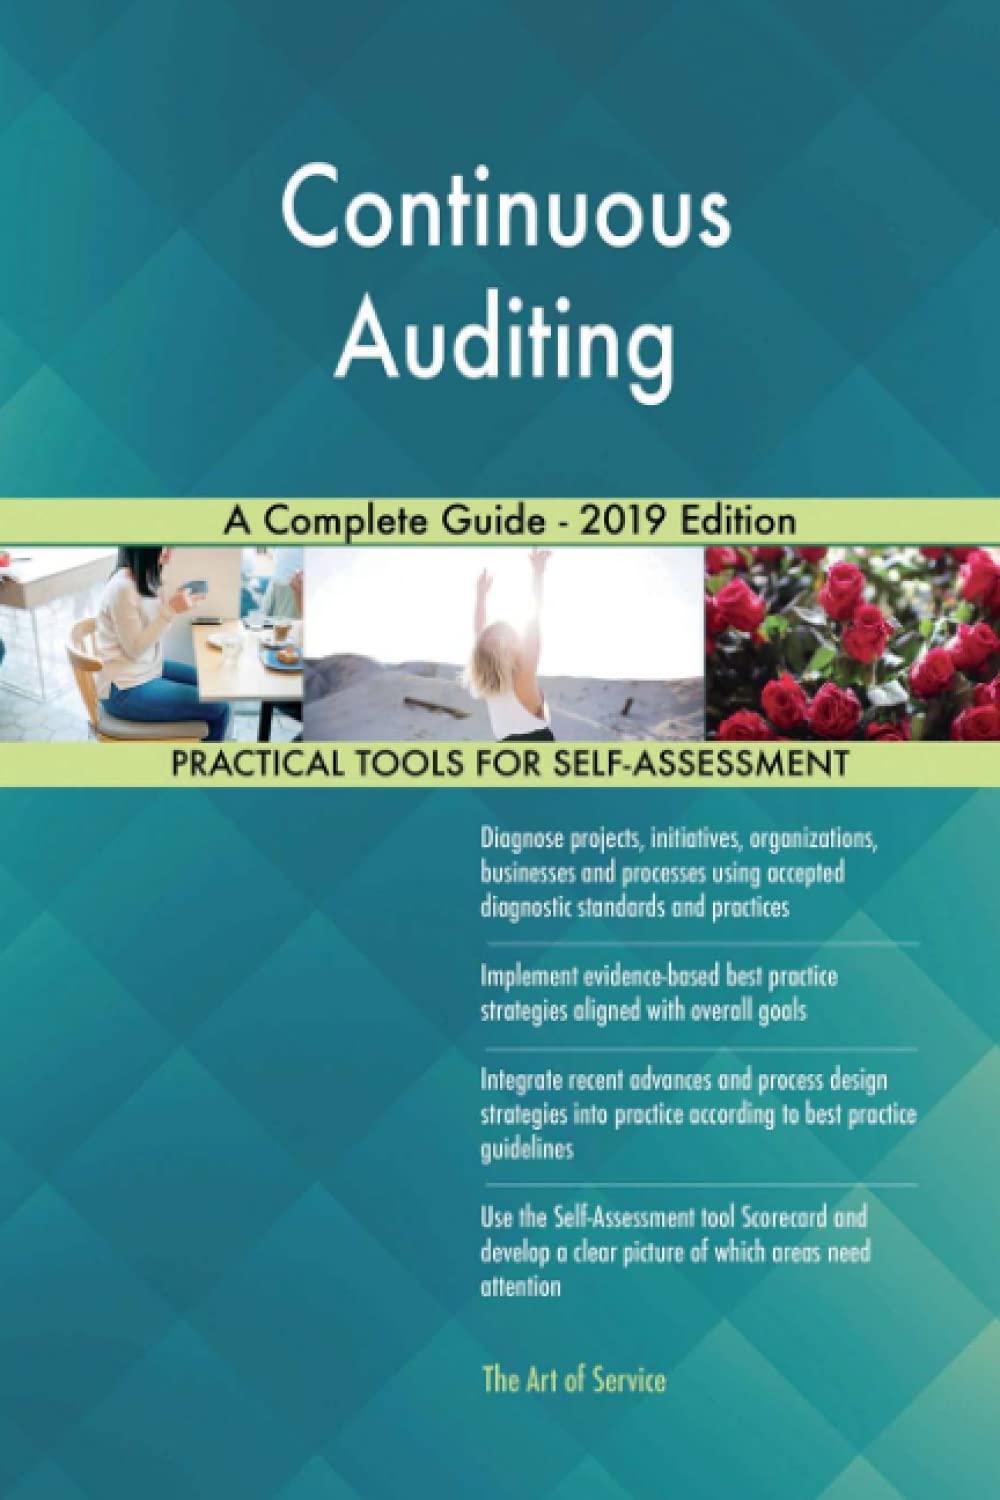 continuous auditing a complete guide 2019th edition gerardus blokdyk 0655540318, 978-0655540311